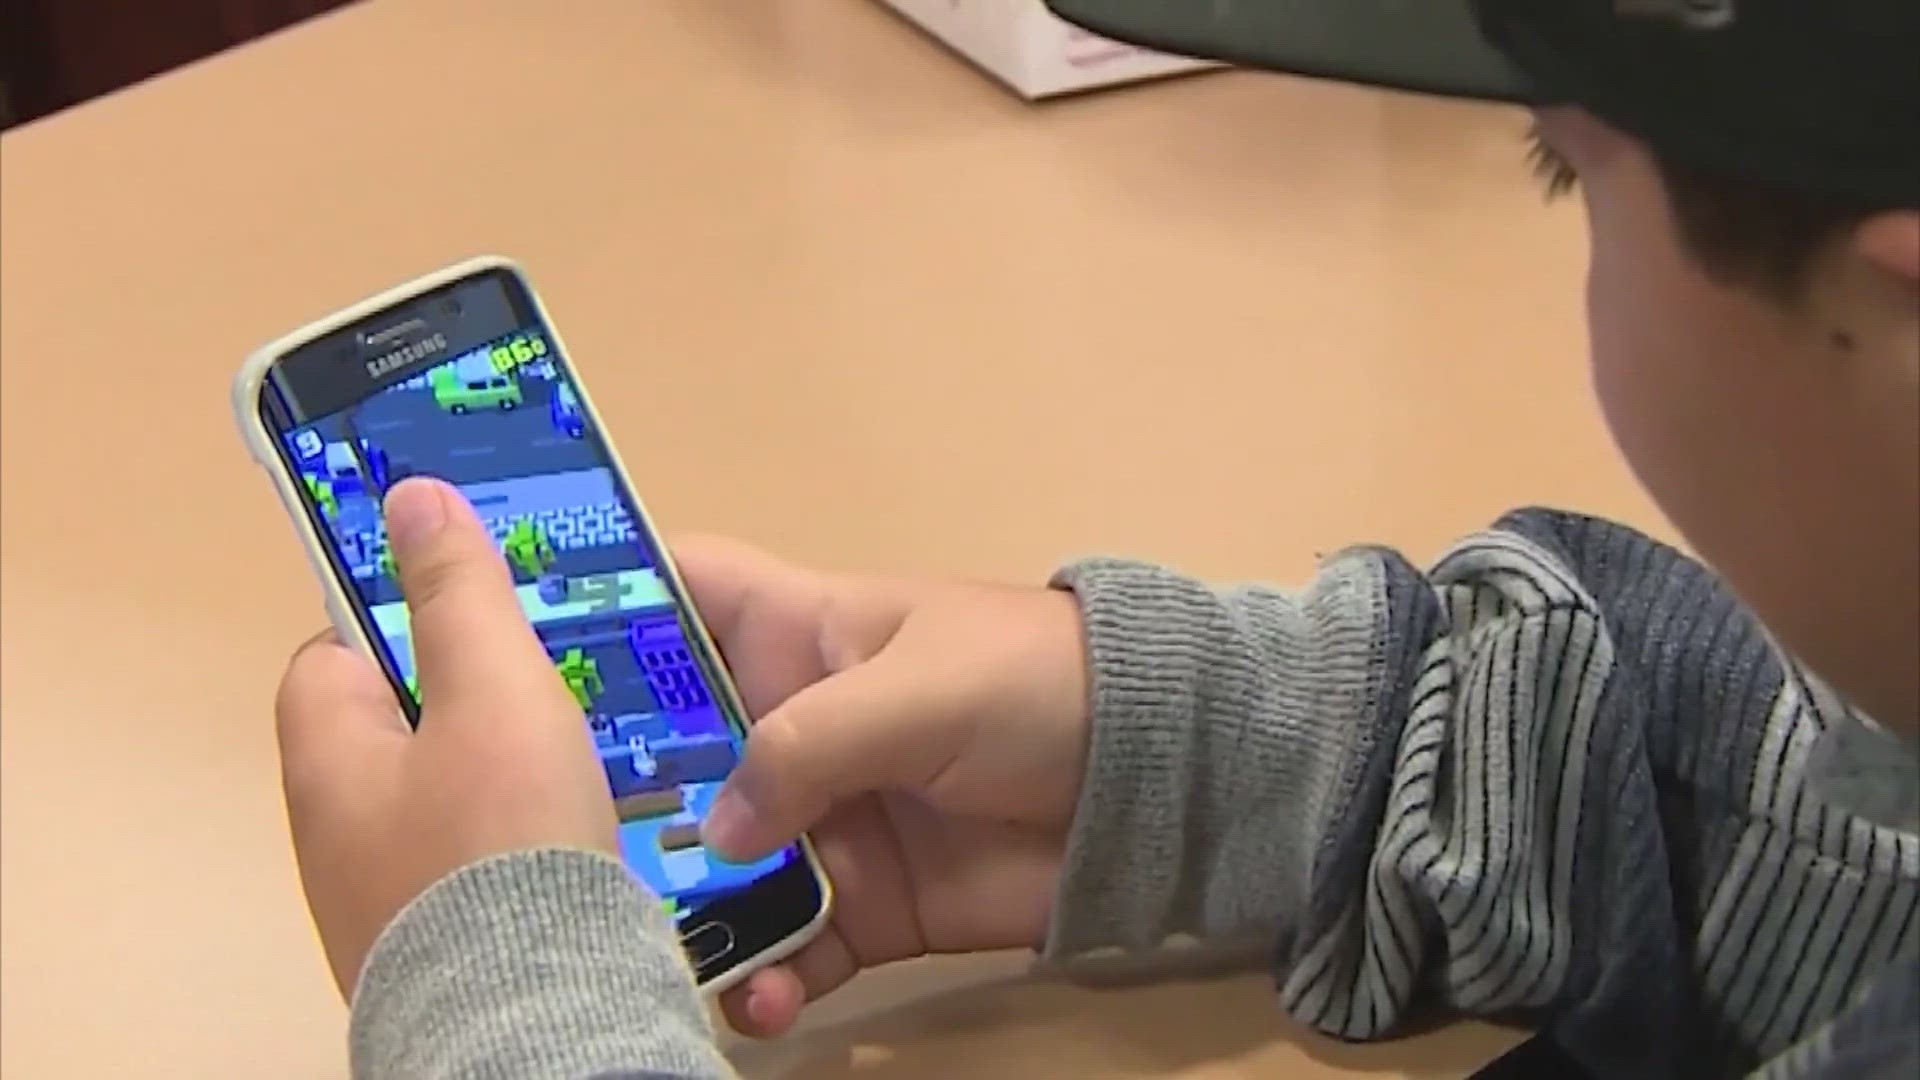 Phones distract kids in classrooms, so this district is requiring